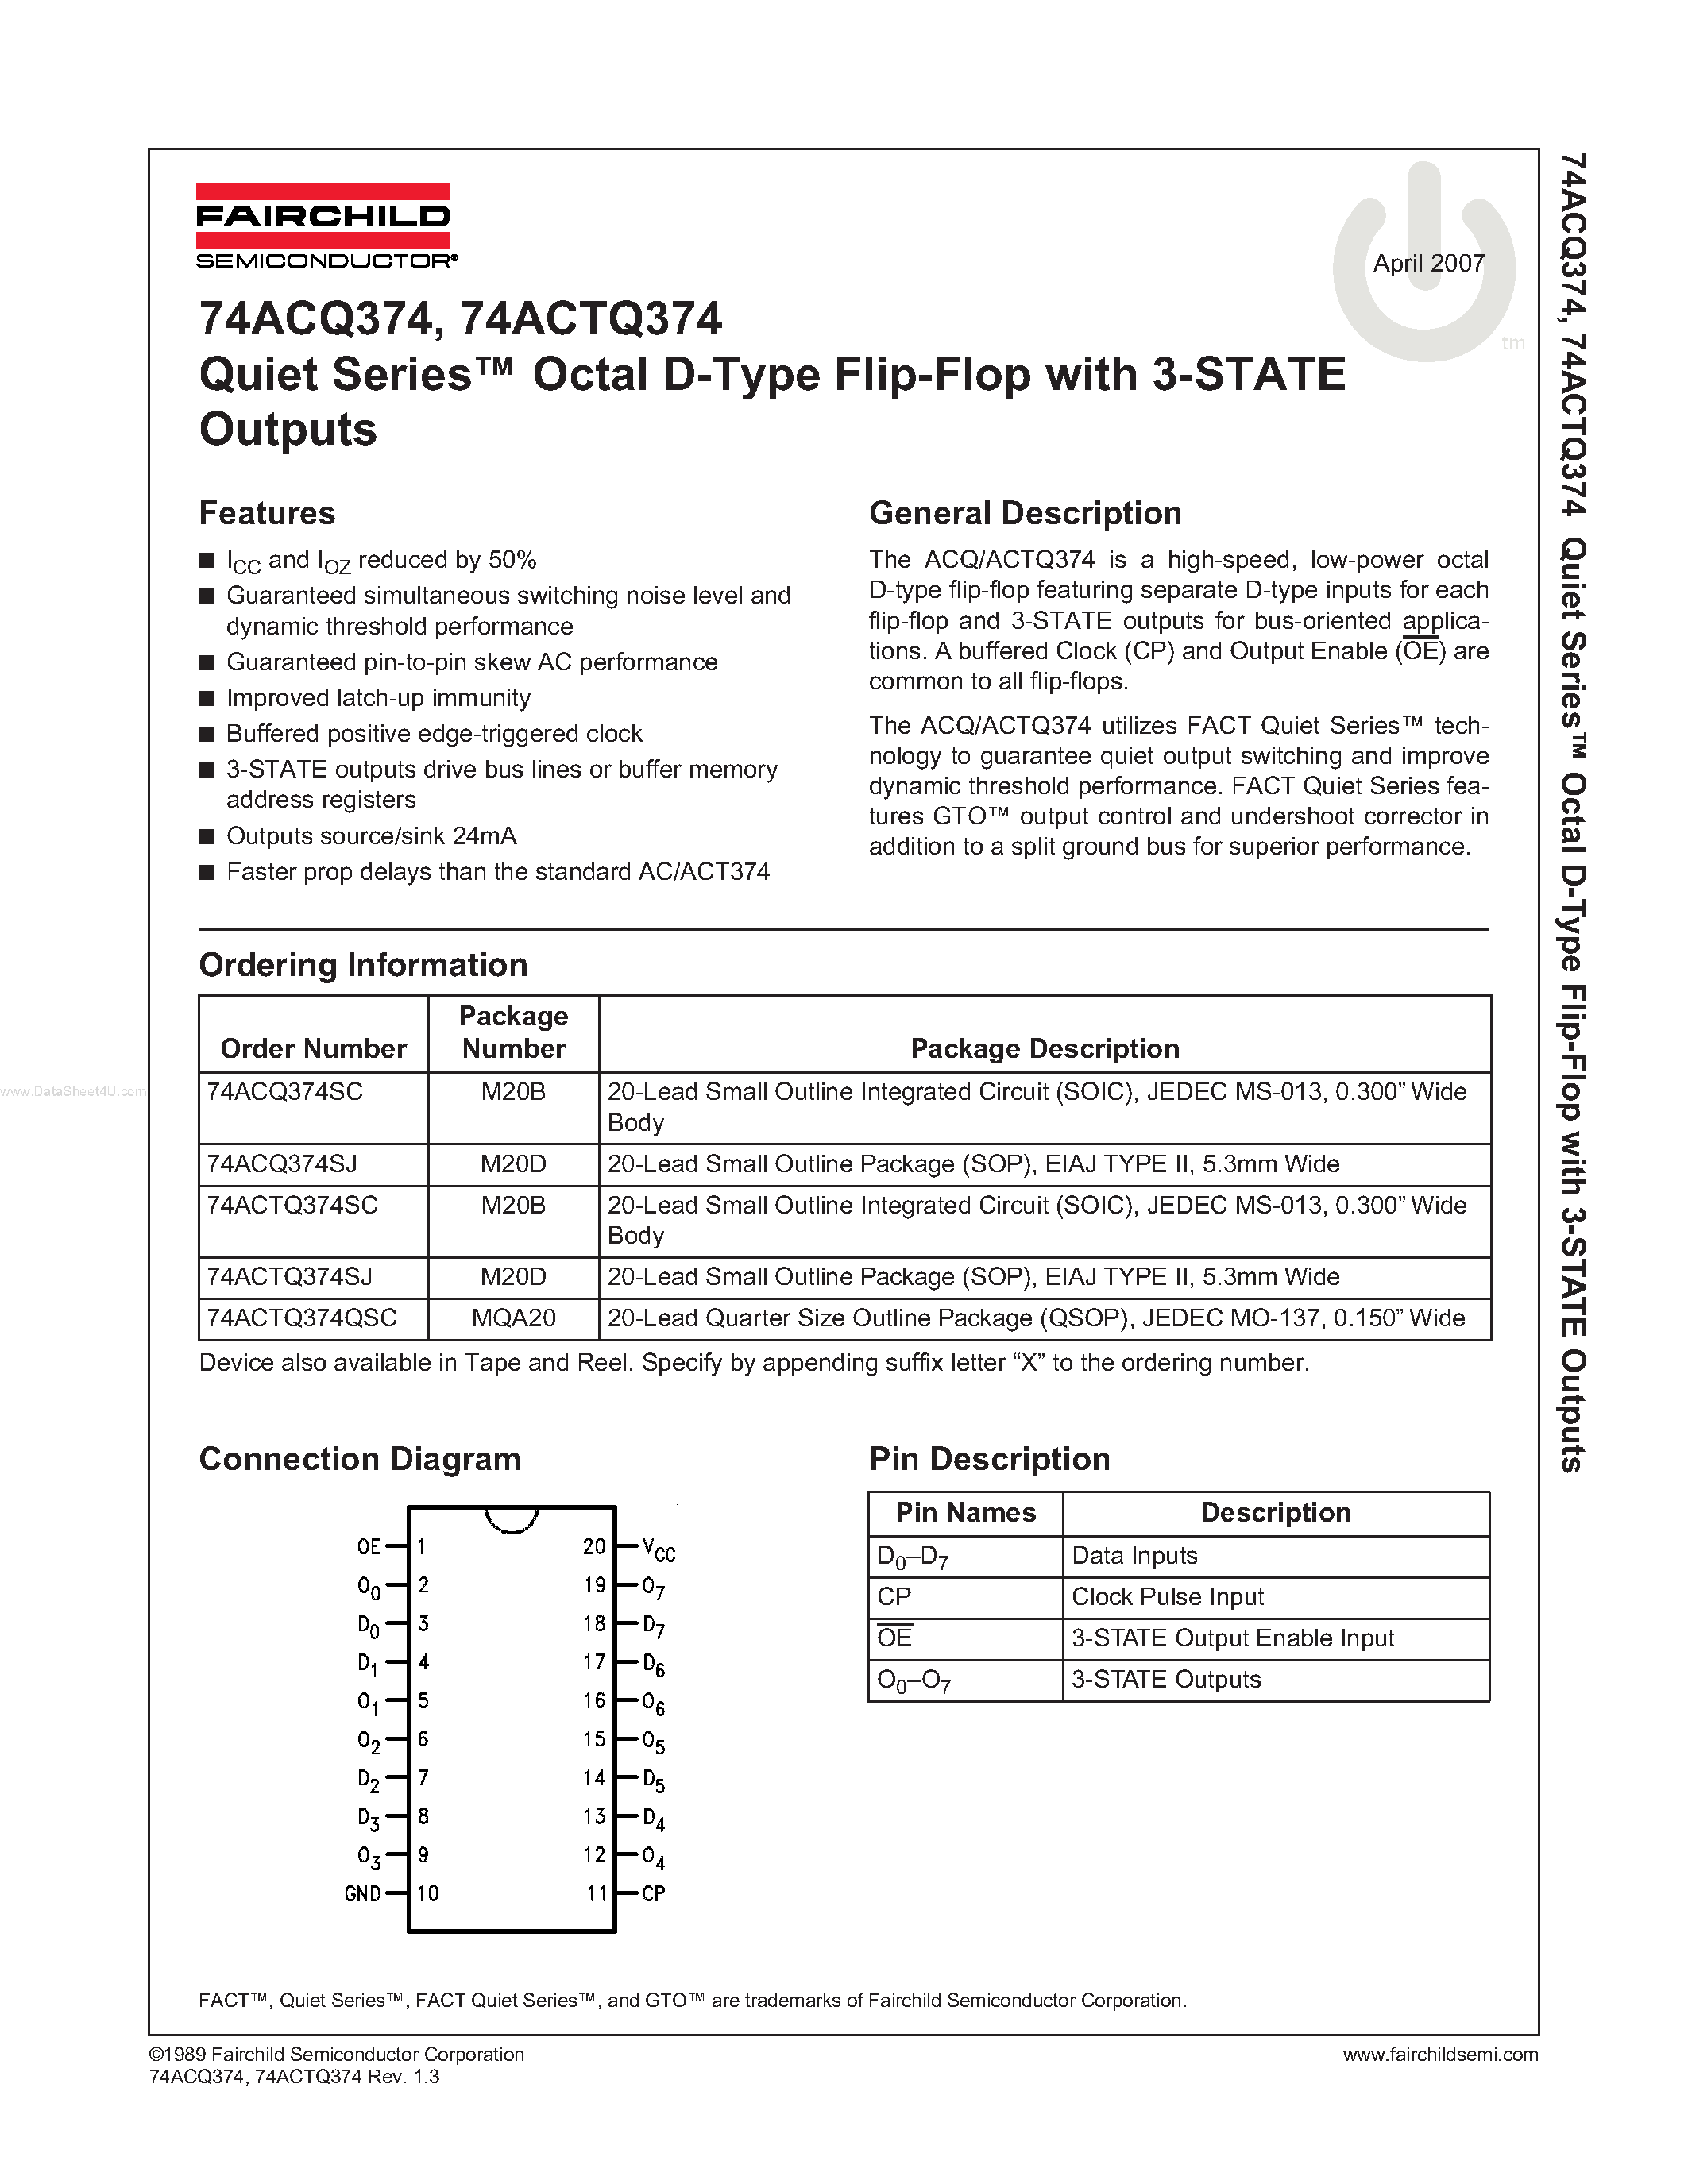 Datasheet 74ACQ374SJ - Quiet Series Octal D-Type Flip-Flop with 3-STATE Outputs page 1